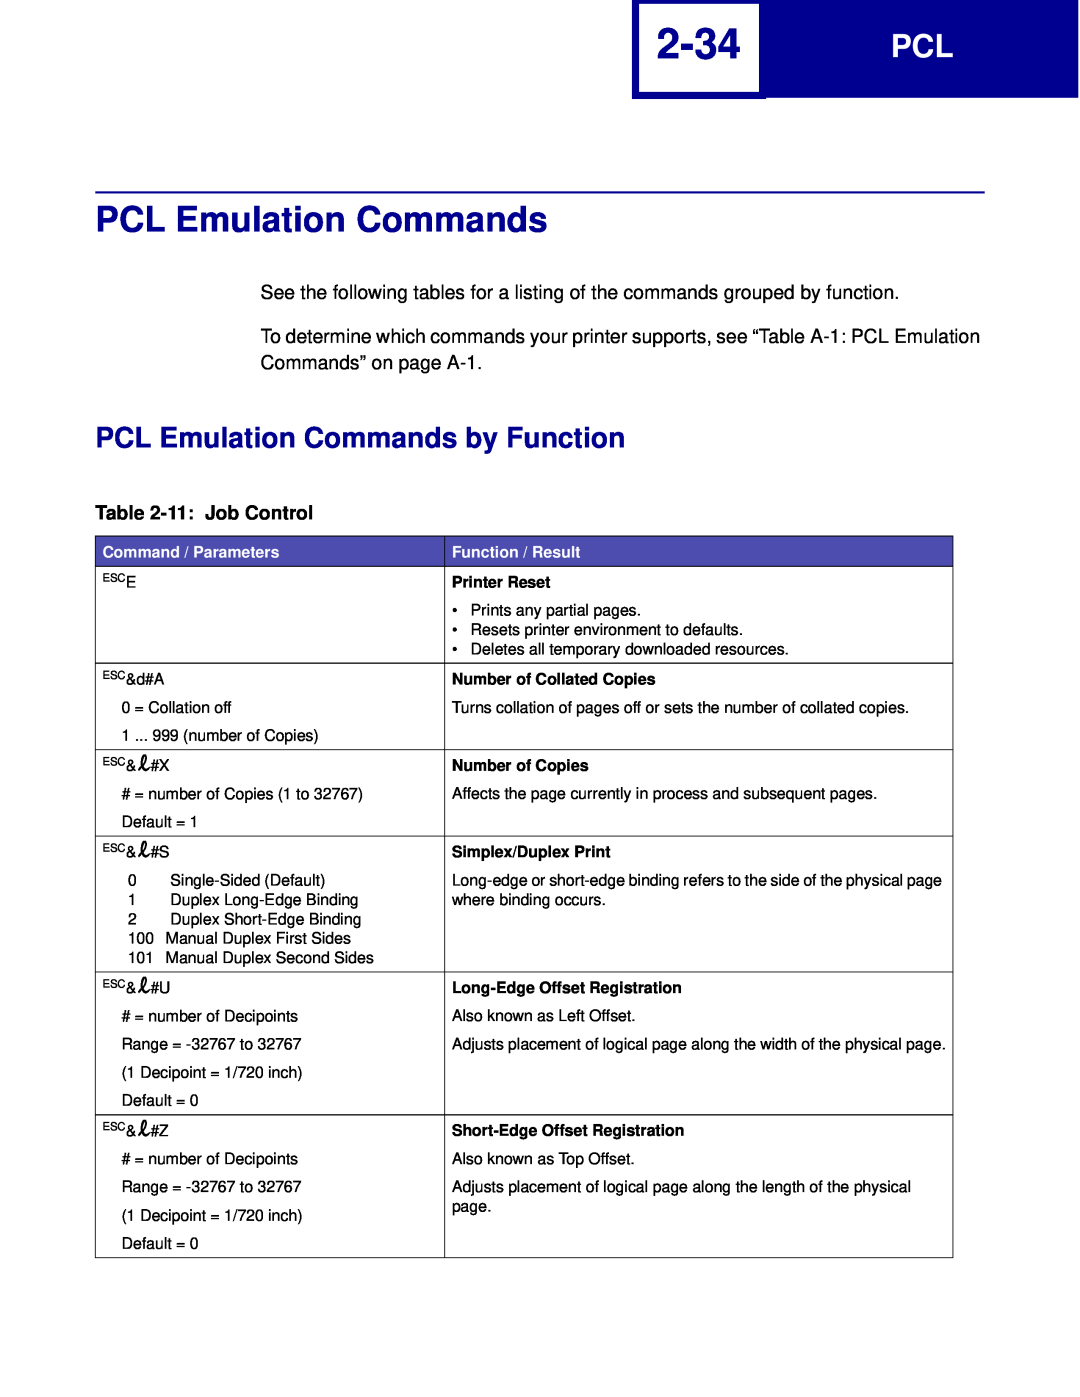 Lexmark C760, C762 manual 2-34, PCL Emulation Commands by Function, 11 Job Control 